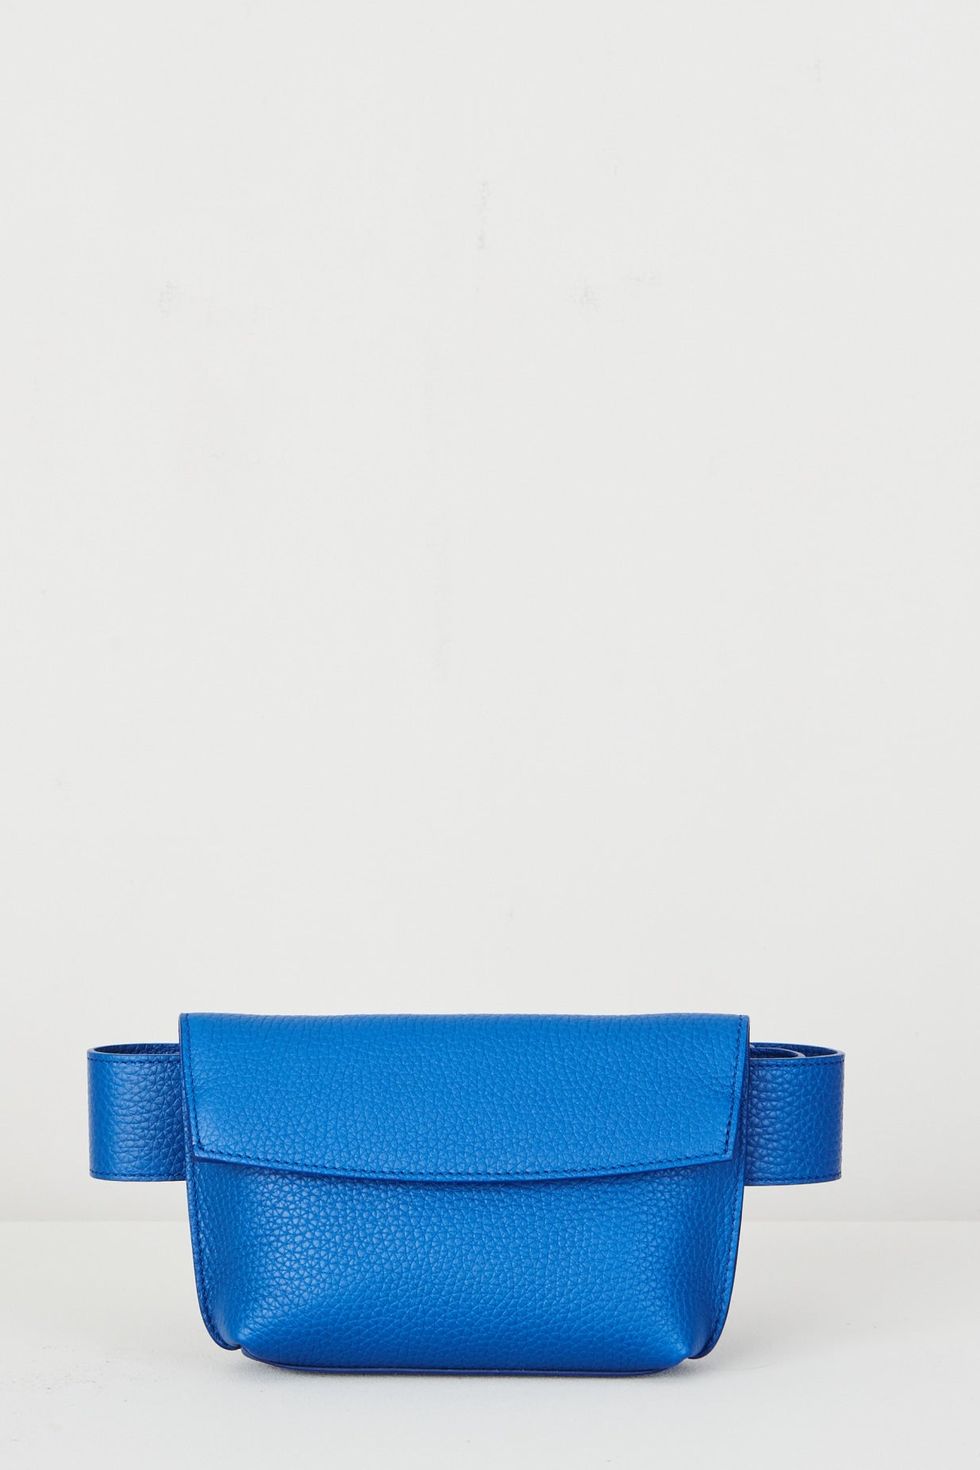 14 Designer Belt Bags That Just Keep Trying to Make “Fetch” Happen